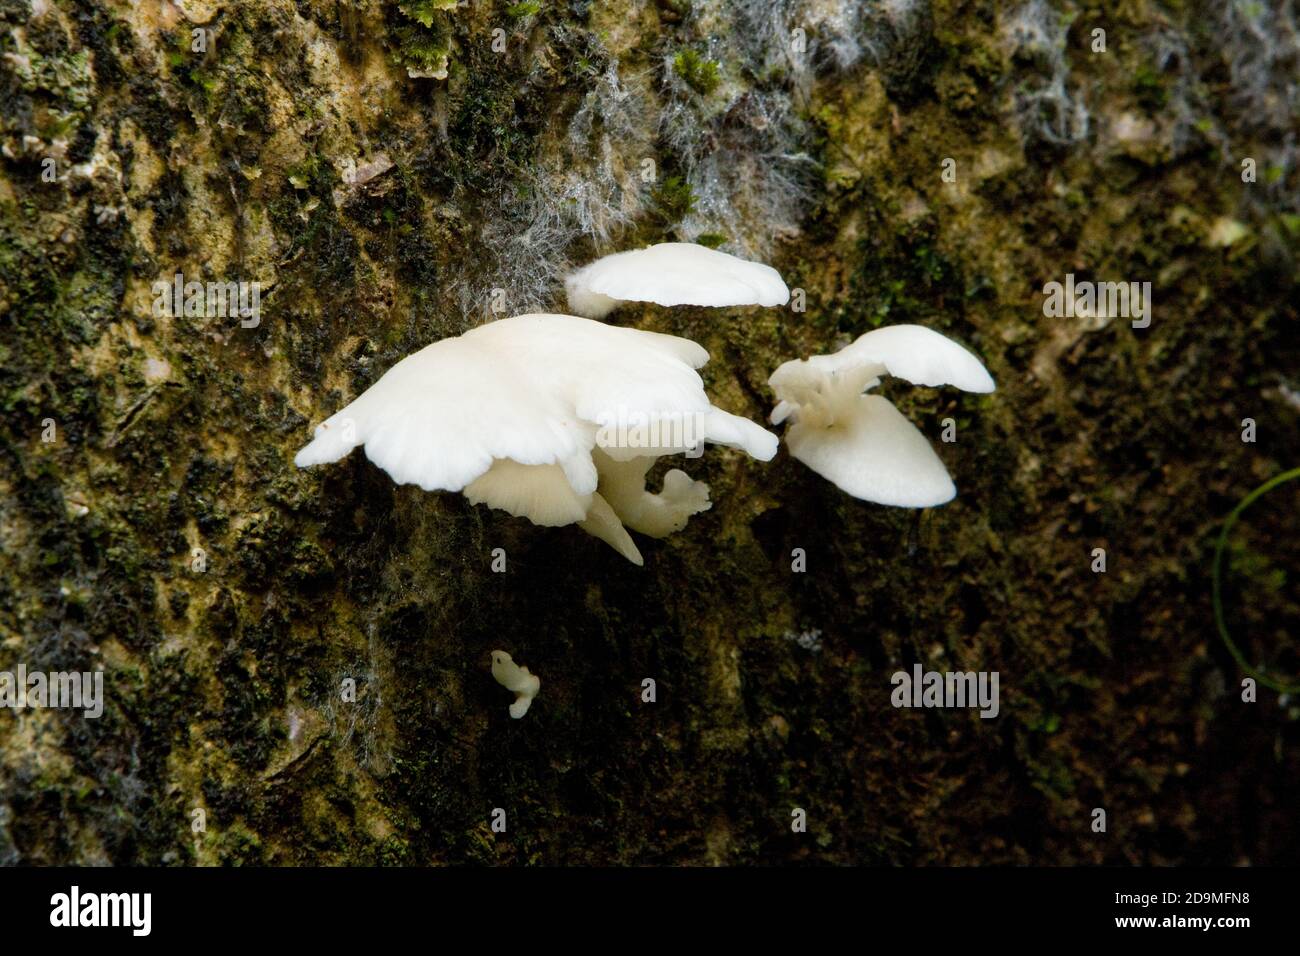 White shelf or bracket fungi on a tree trunk in the rain forests of Panama.  Fungi are one of the principal means of breaking down decaying matter and Stock Photo